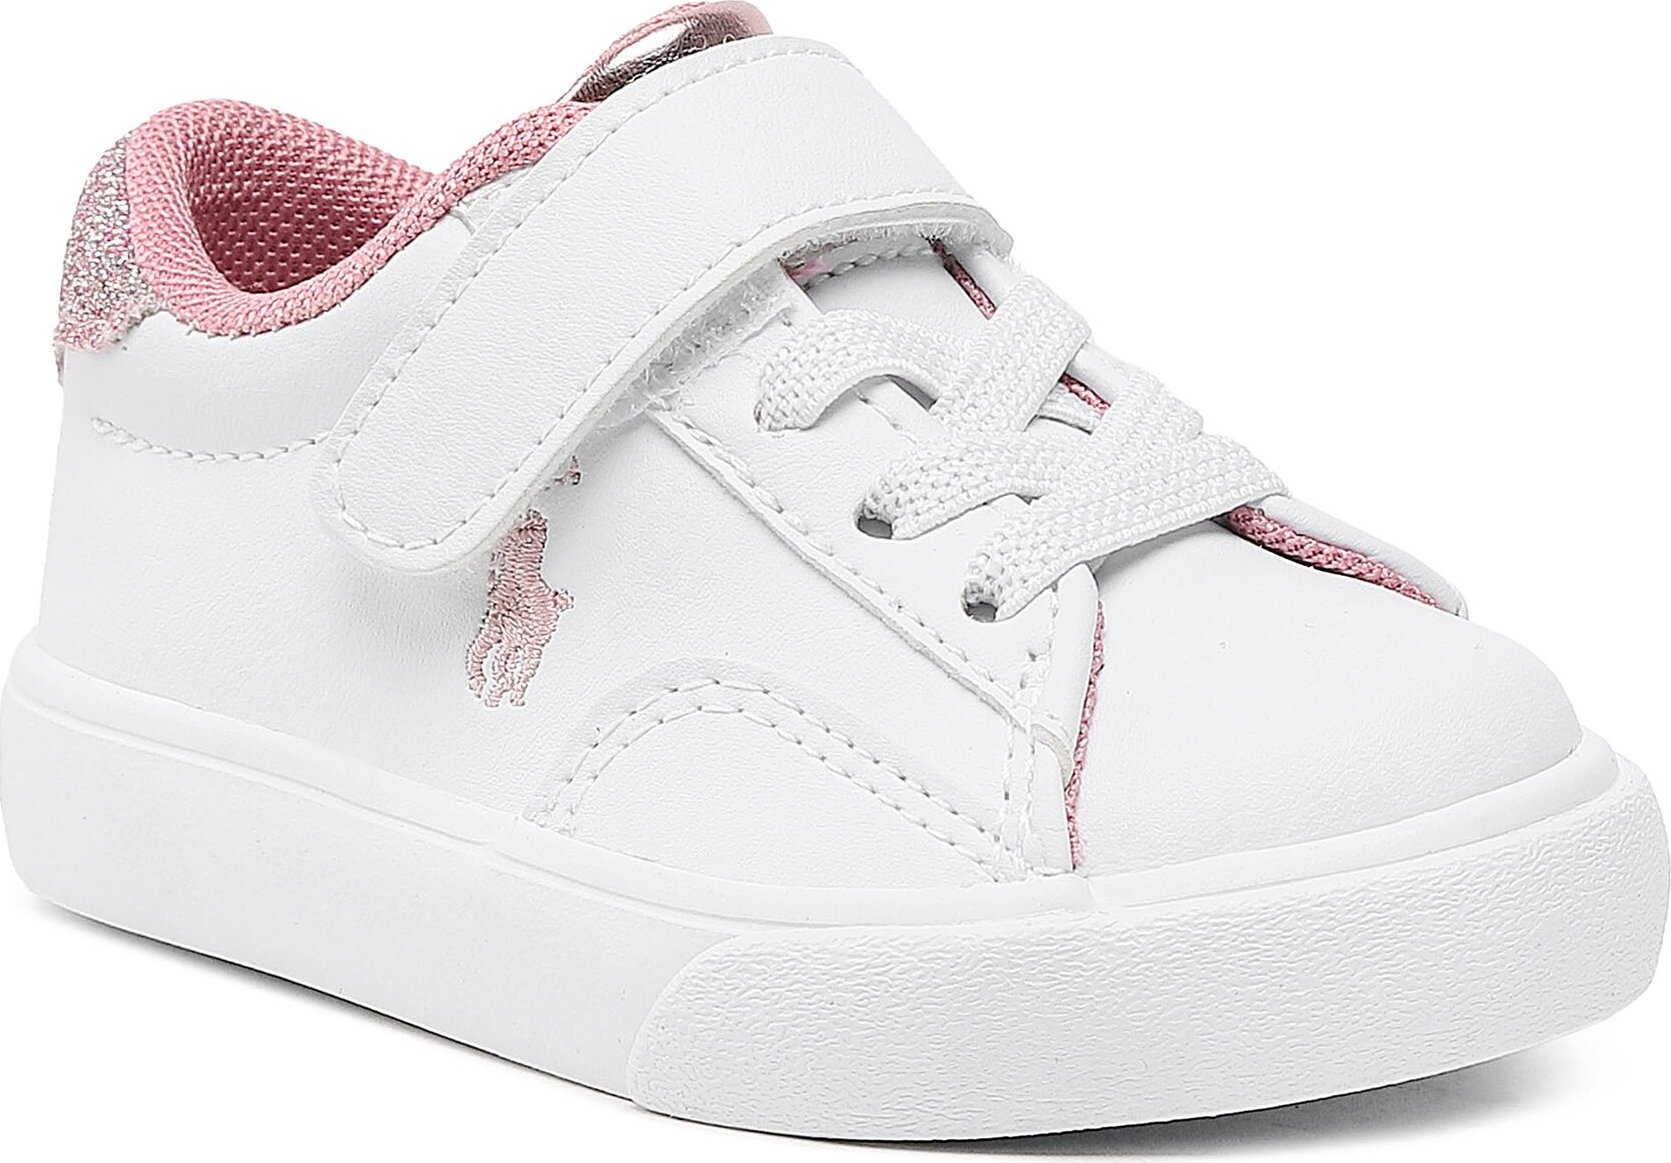 Sneakersy Polo Ralph Lauren Theron V Ps RF104102 White Smooth PU/Lt Pink/Glitter w/ Lt Pink PP